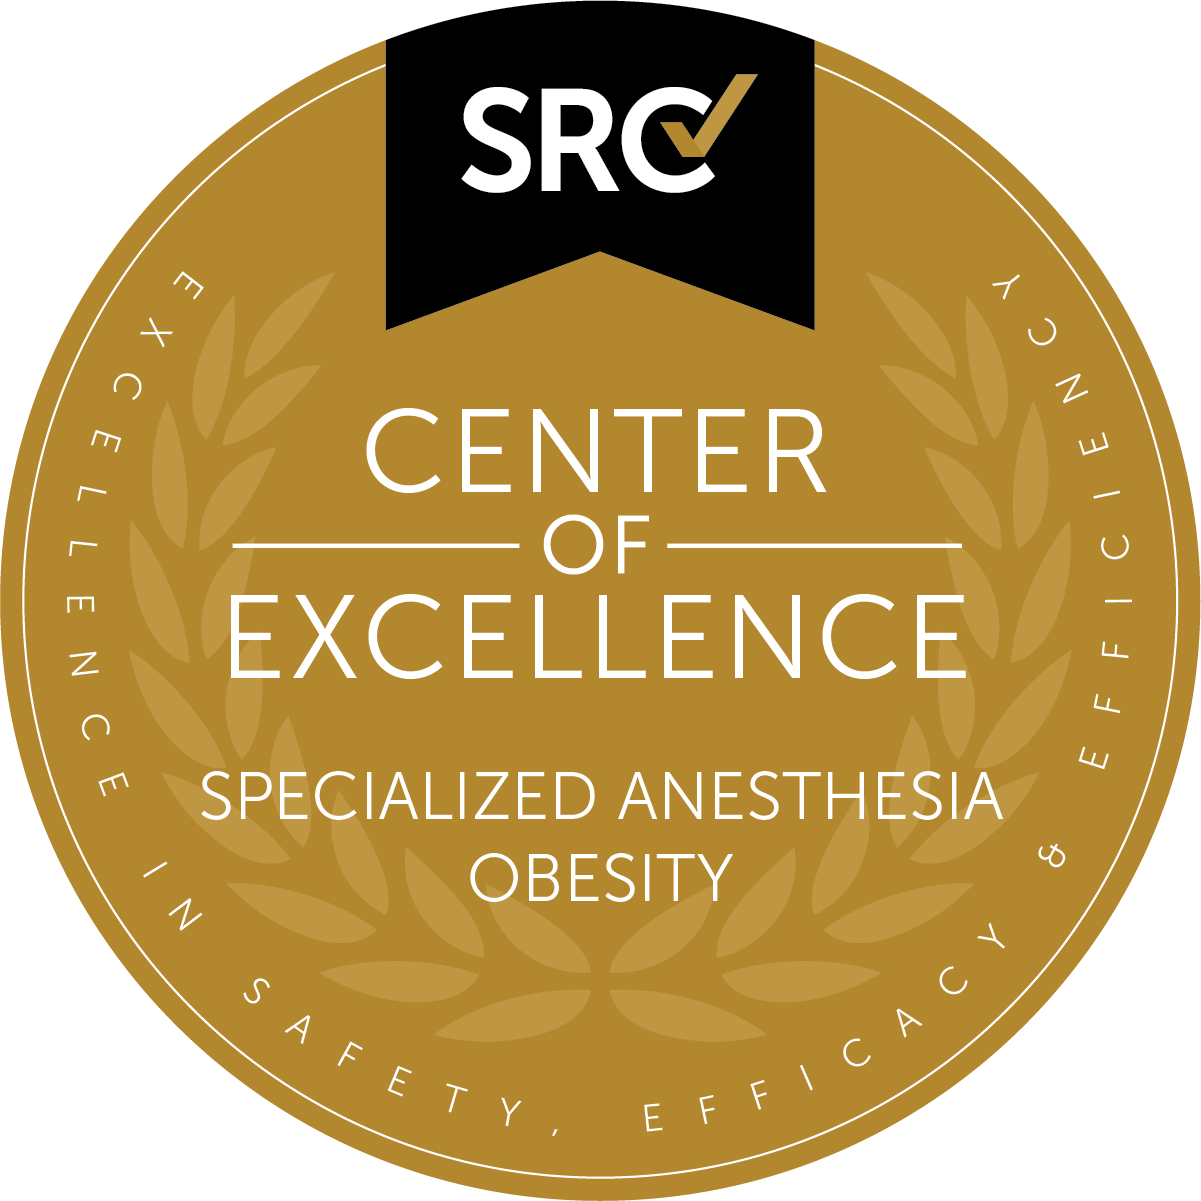 Center of Excellence in Specialized Anesthesia - Obesity (SRC)